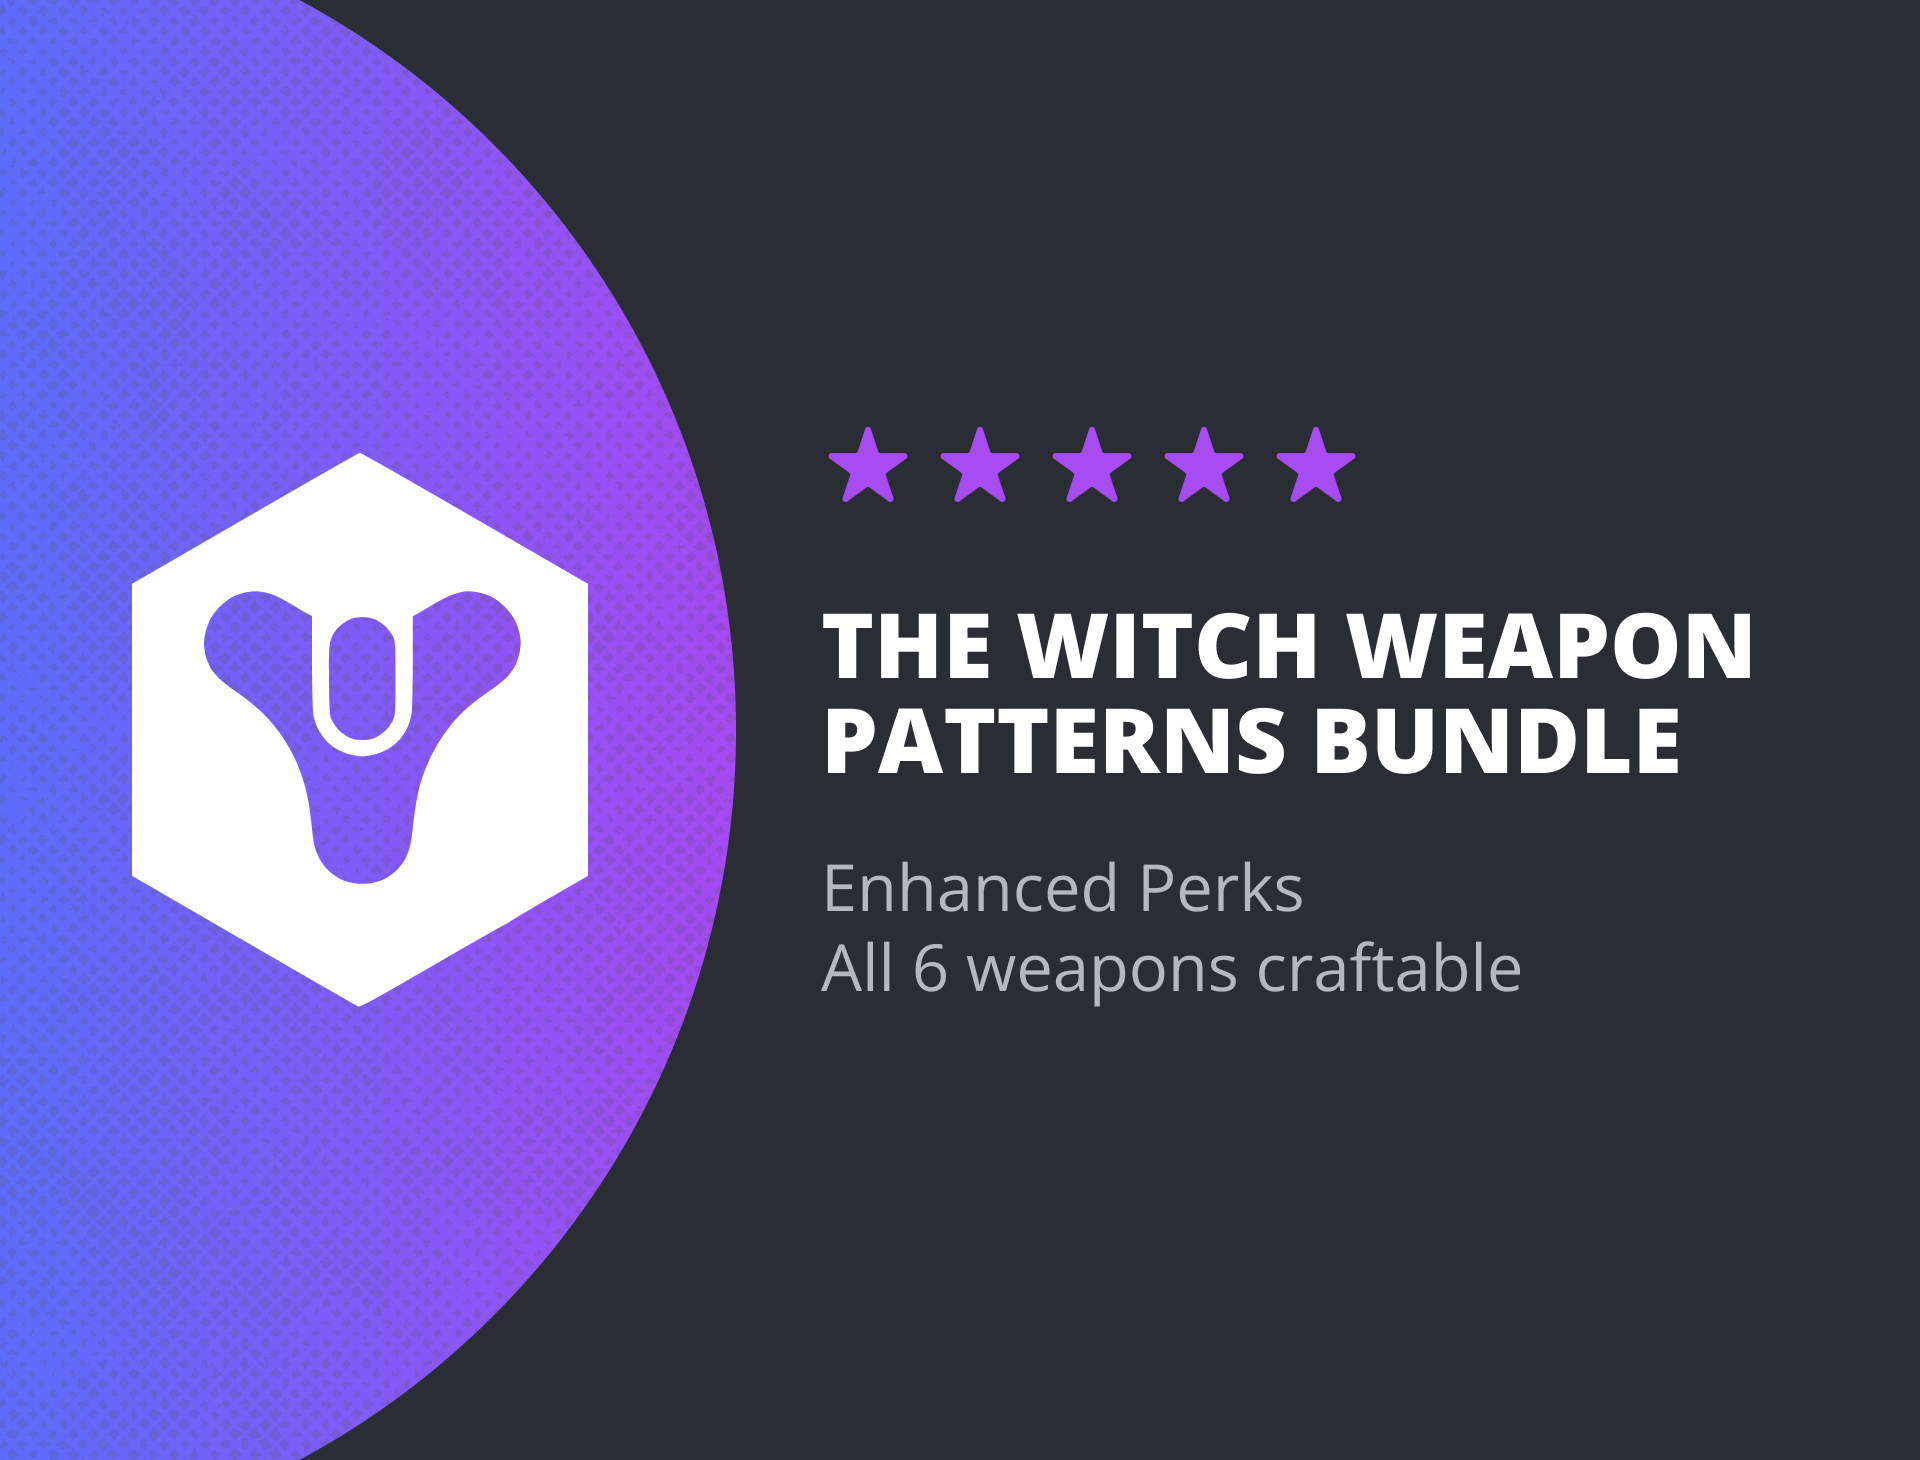 The Witch Weapon Patterns Bundle